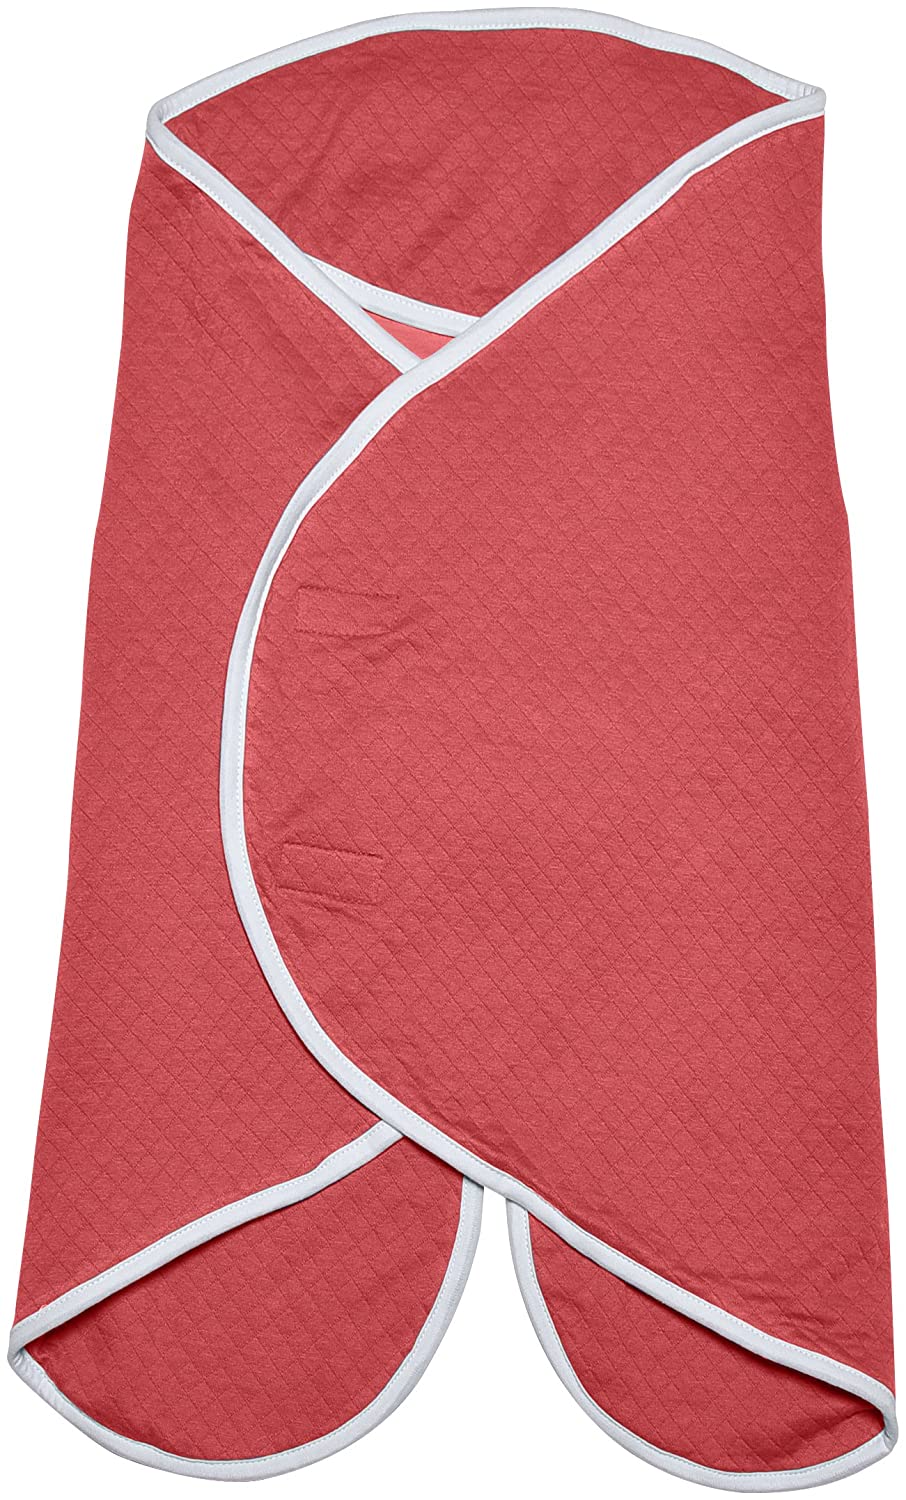 Red Castle Baby Nomade Blanket coral red